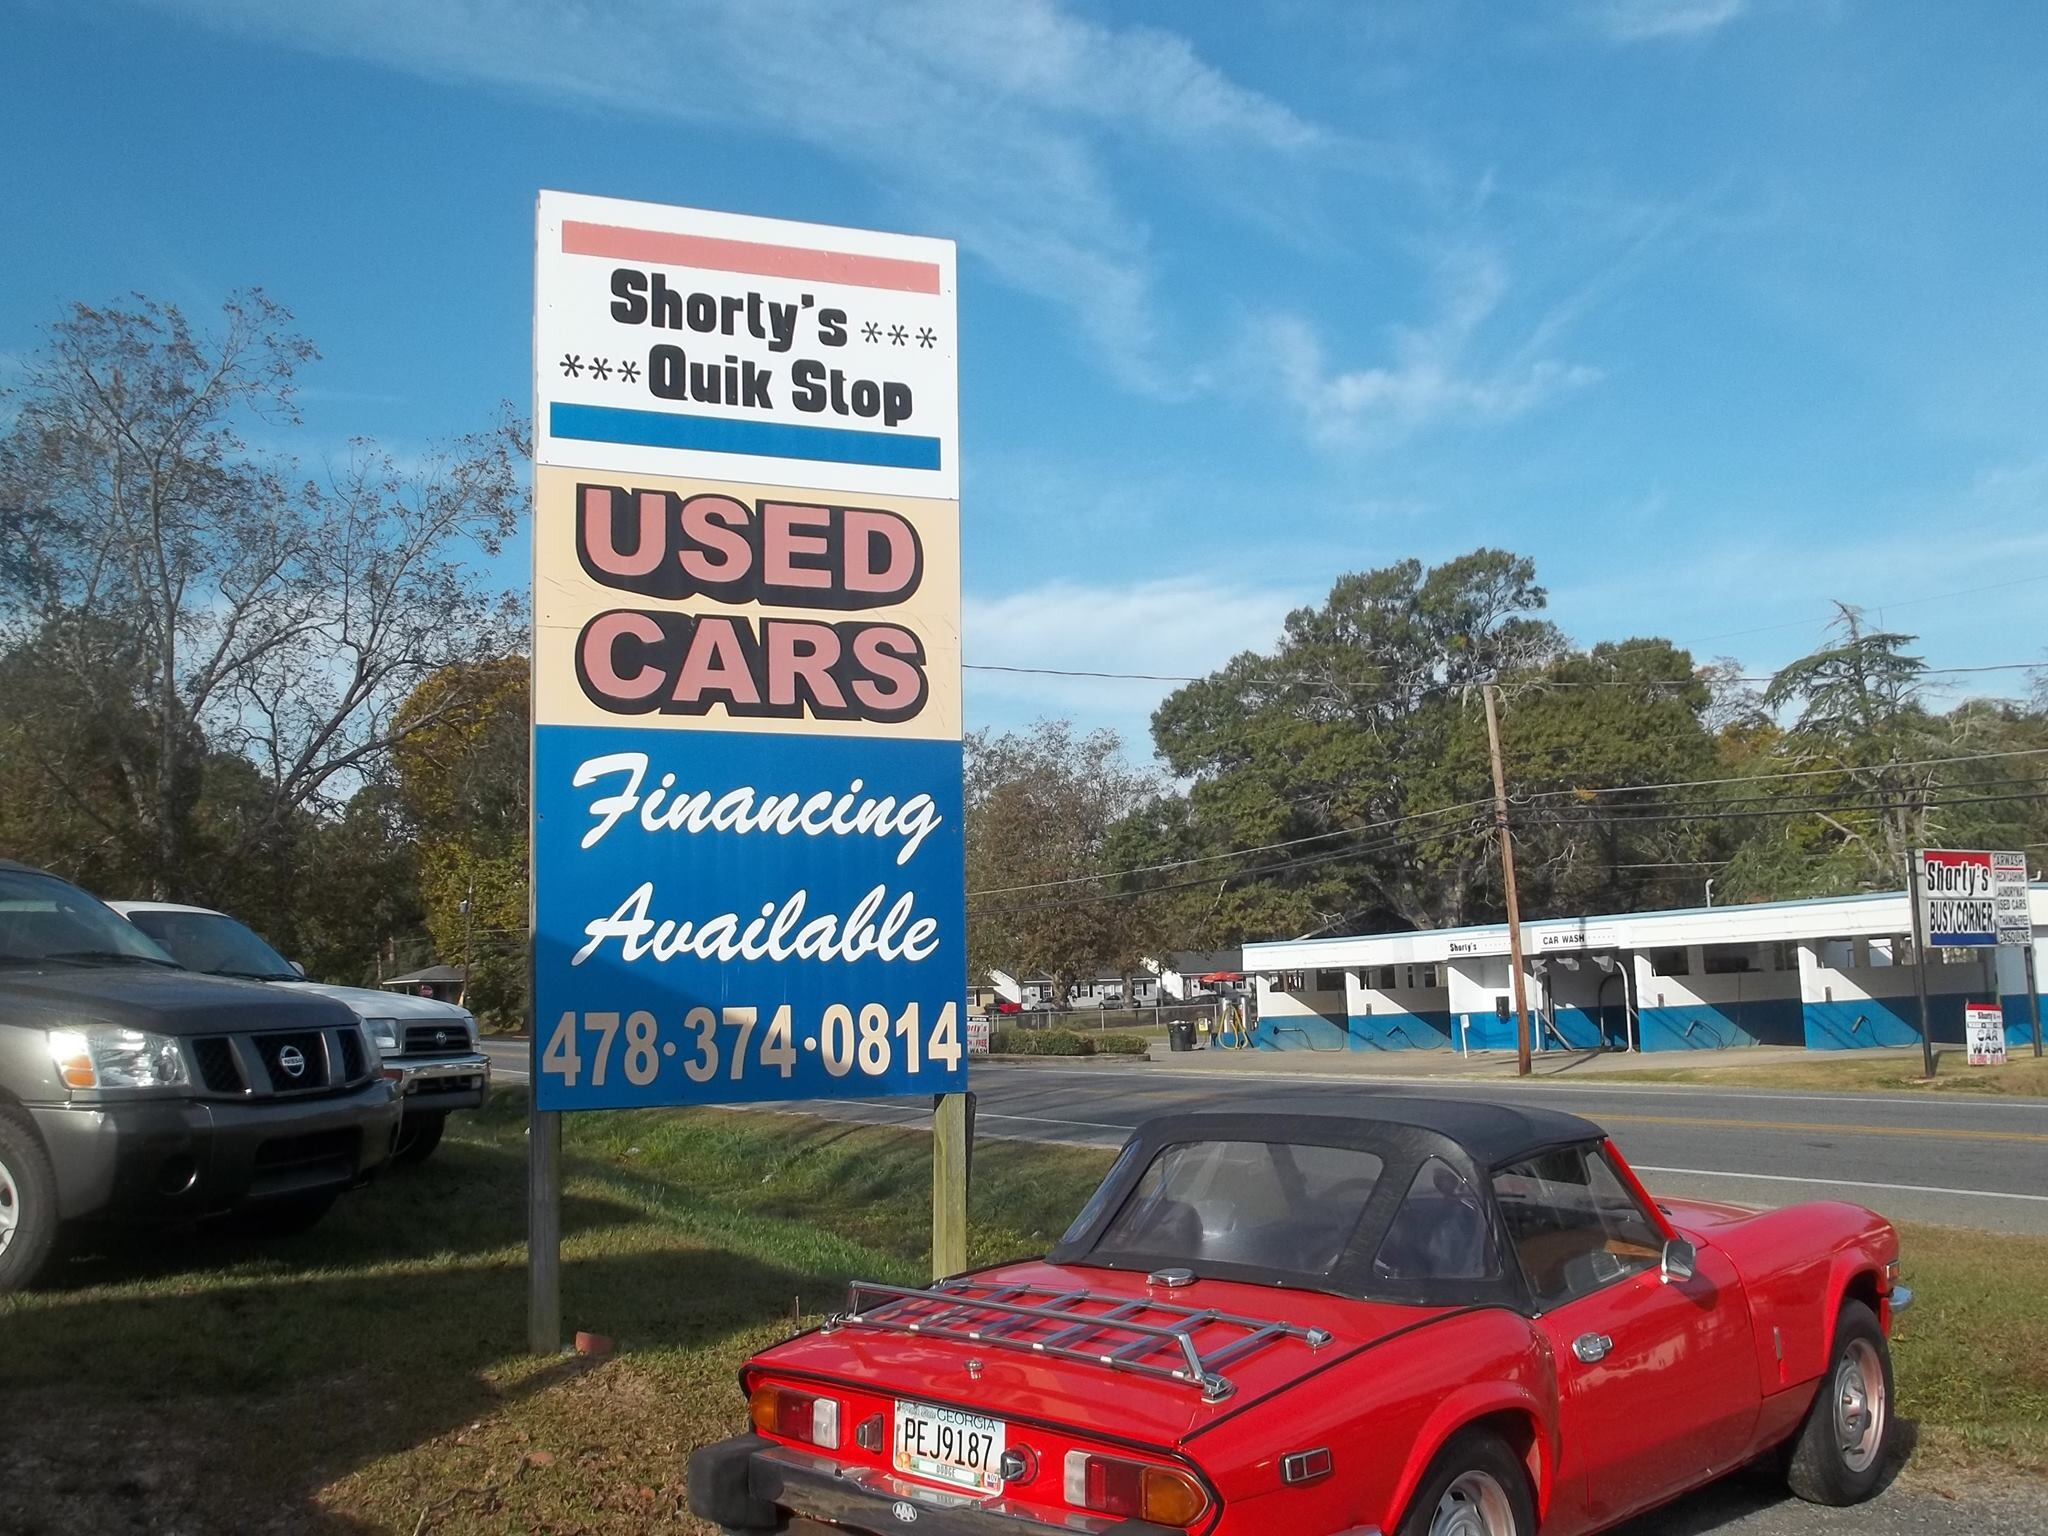 Shorty's Quick Stop Used Cars in Eastman, GA 31023